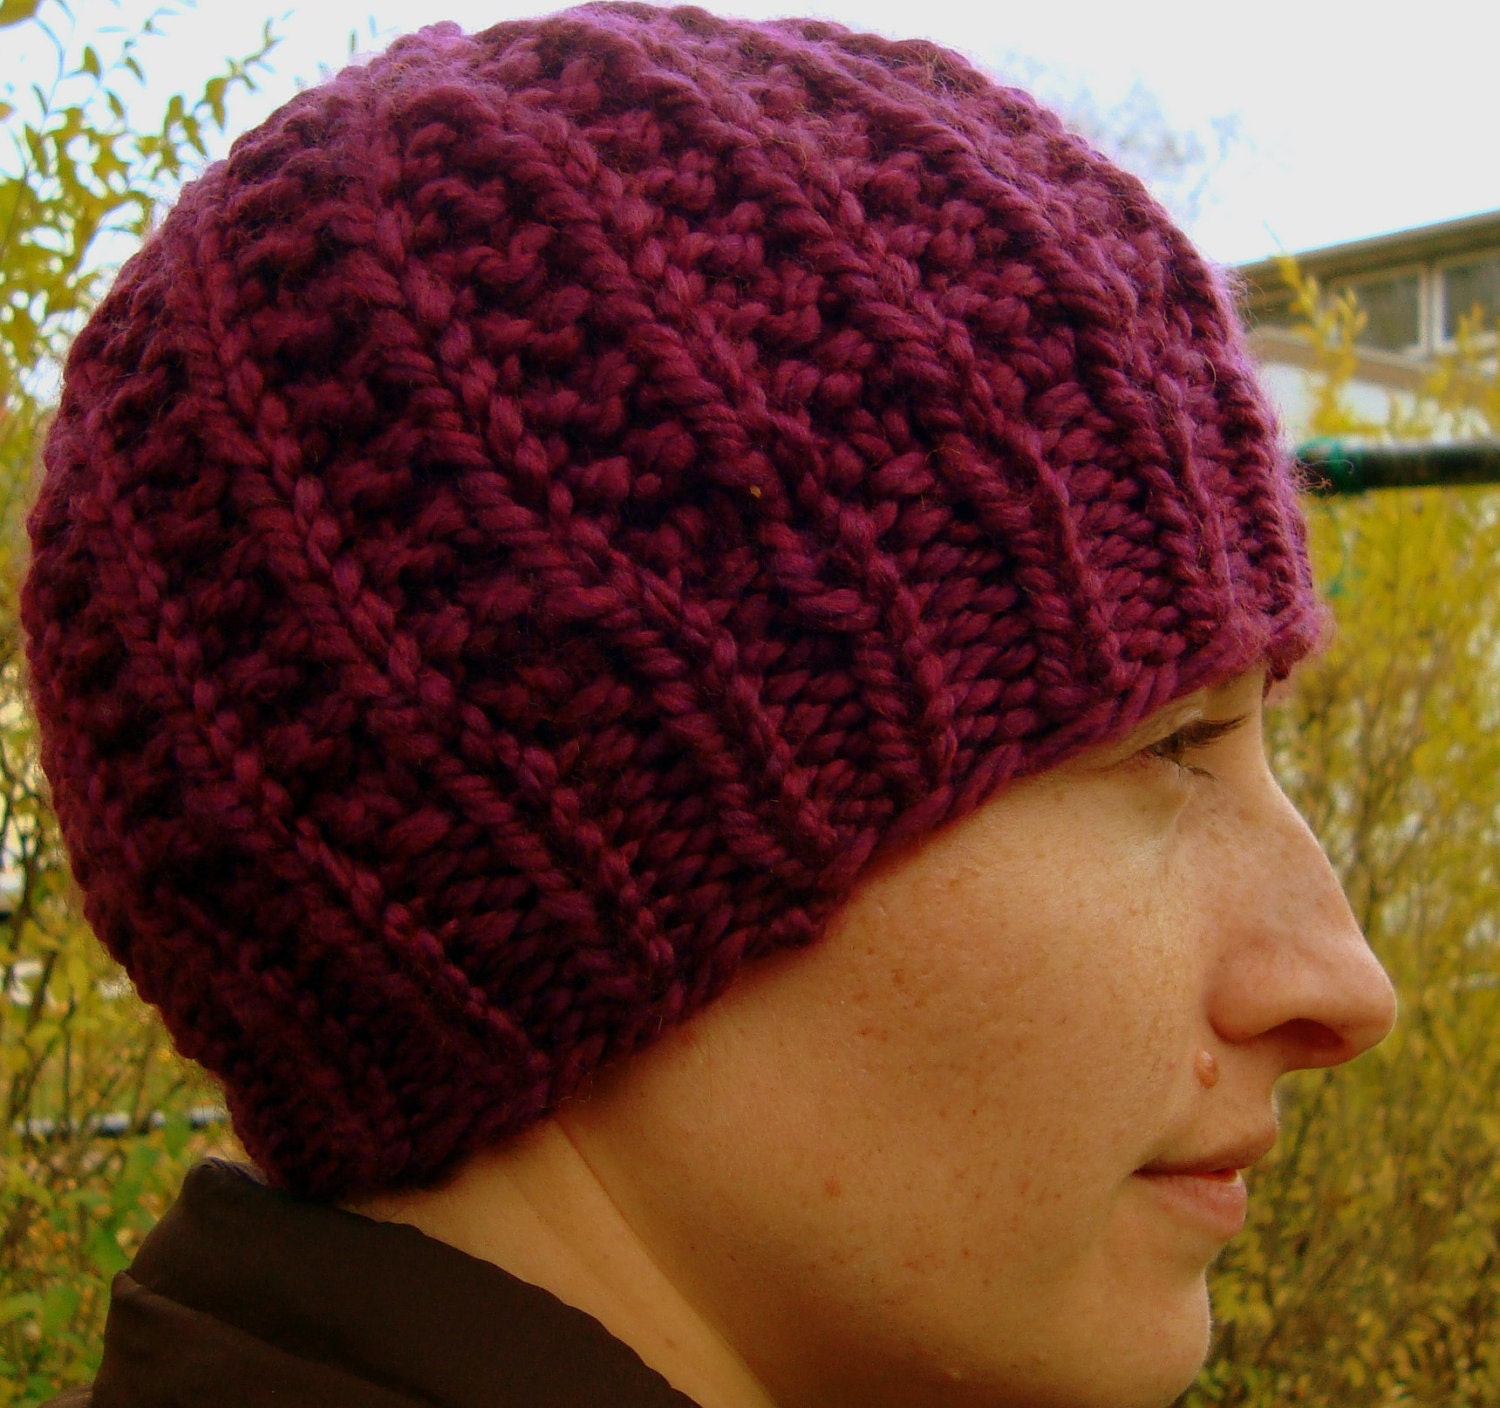 SALE Black Friday/Cyber Monday- Hand Knit Cozy Hat in Cranberry - KnitMomWi